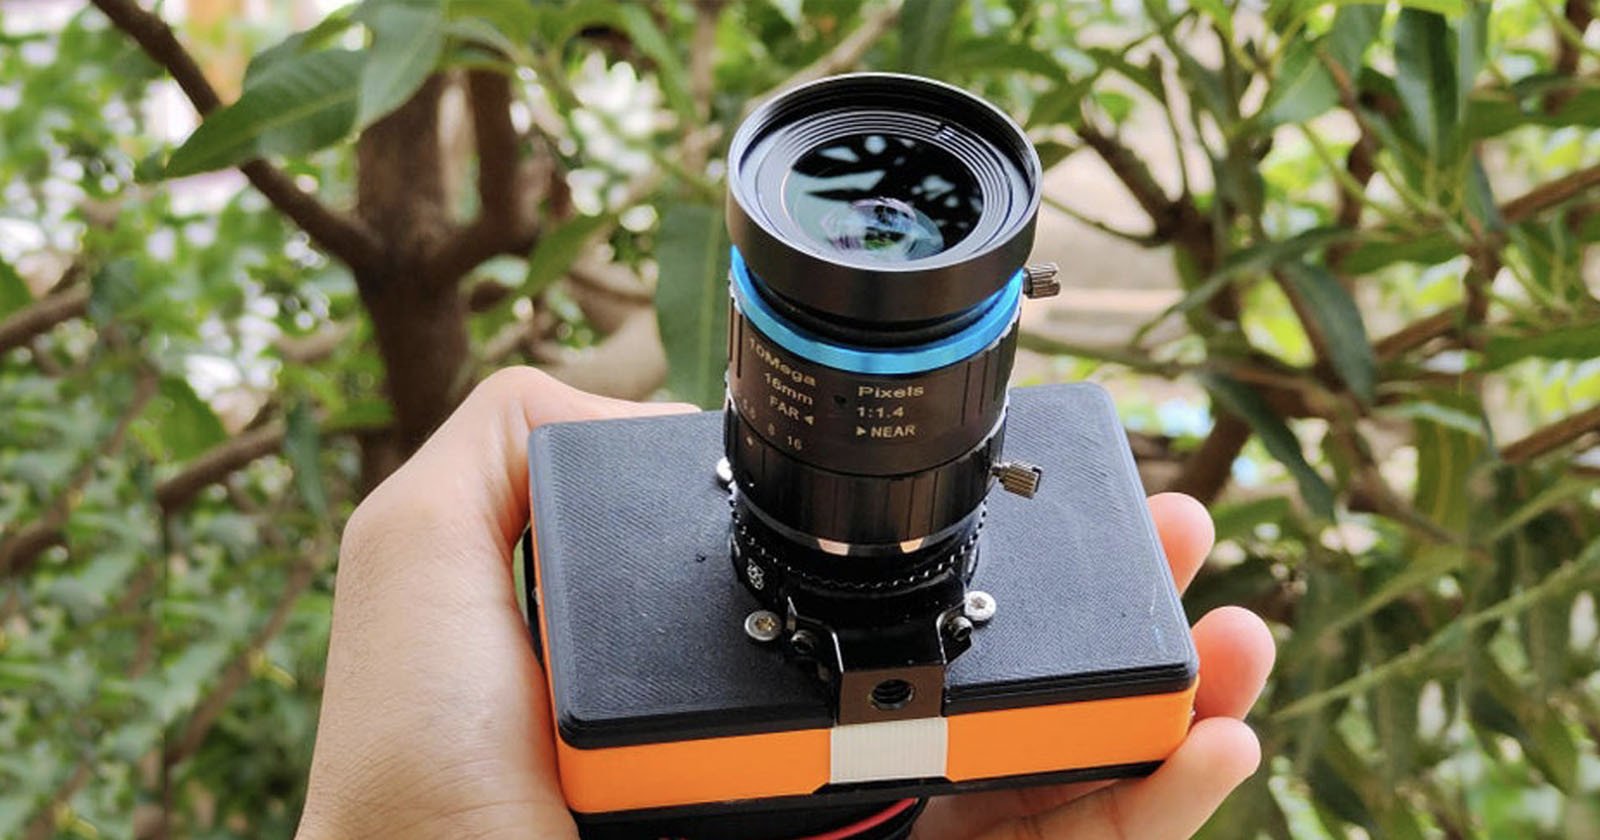  3d-printed 12mp camera runs linux can operated 